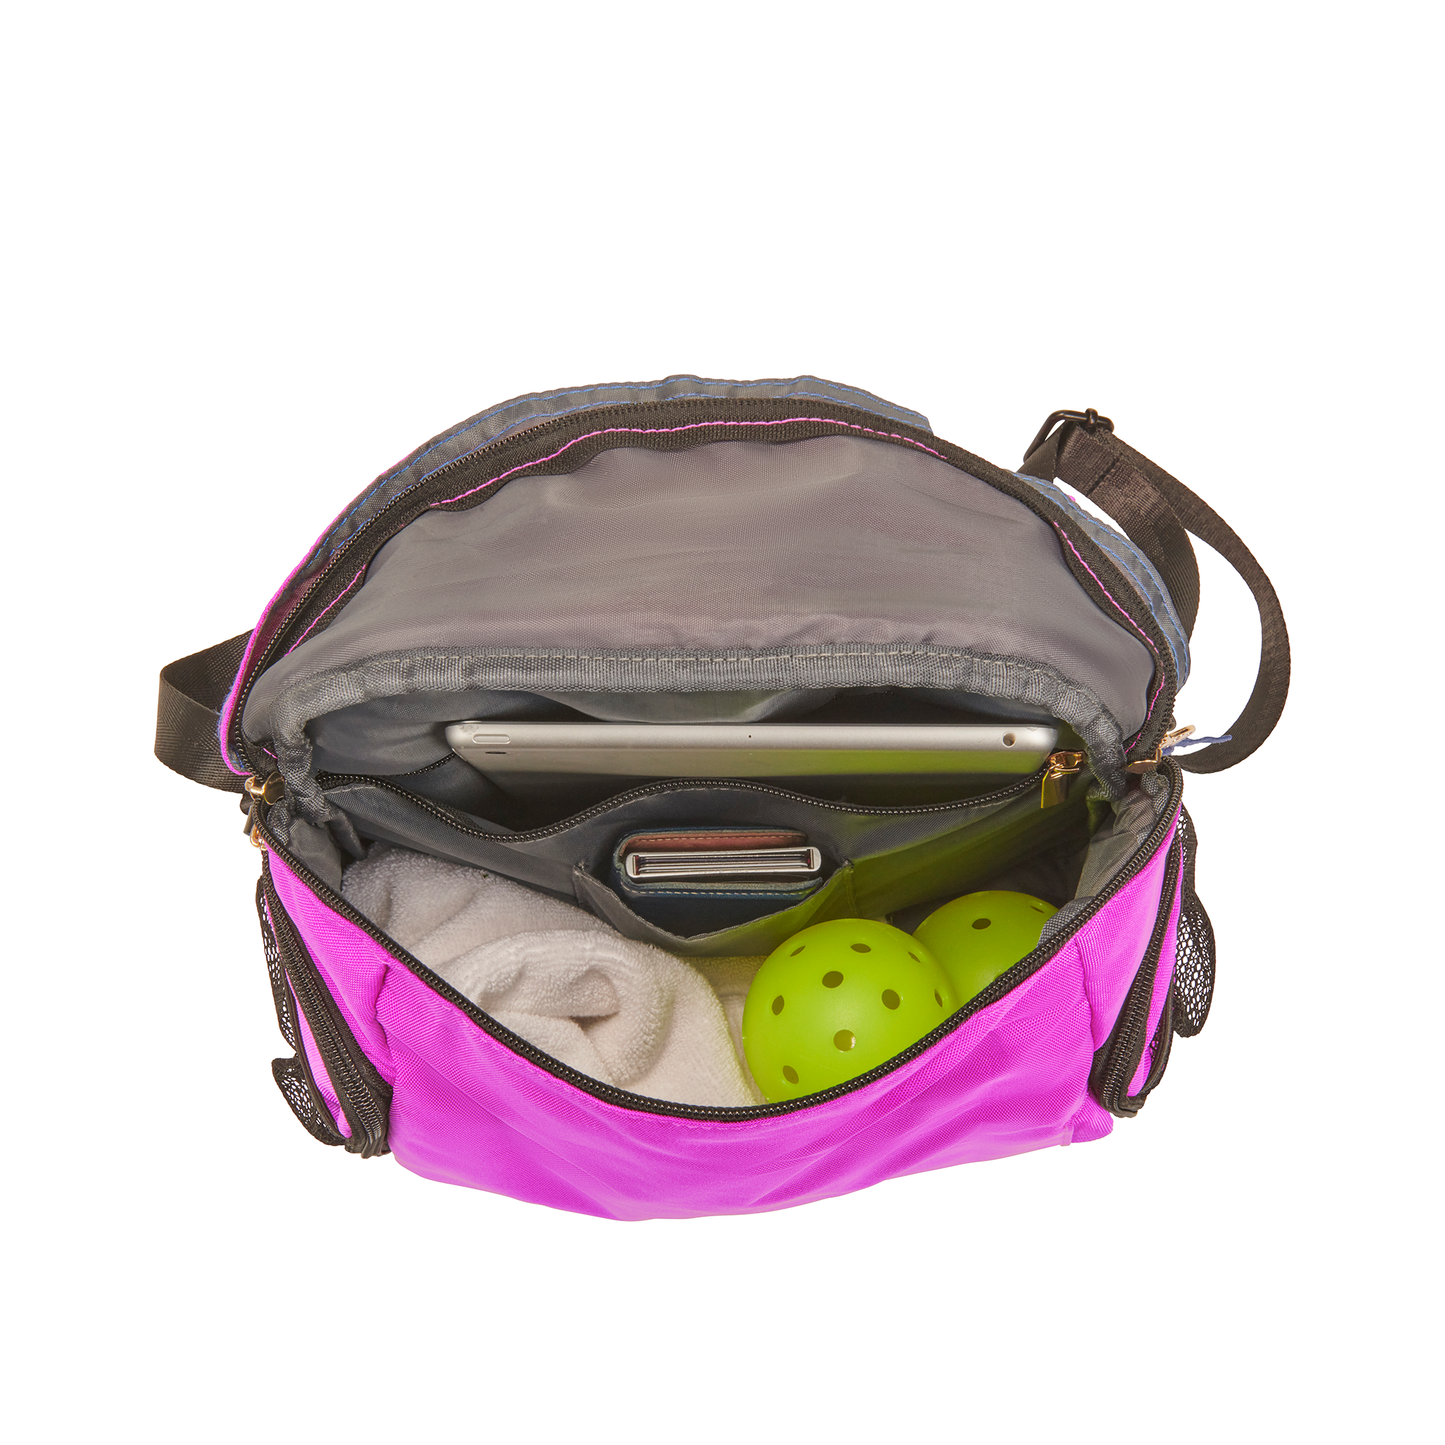 Top view of women’s designer Pickleball Backpack with front pocket for towels, ipad, extra balls, jacket, wallet and essentials